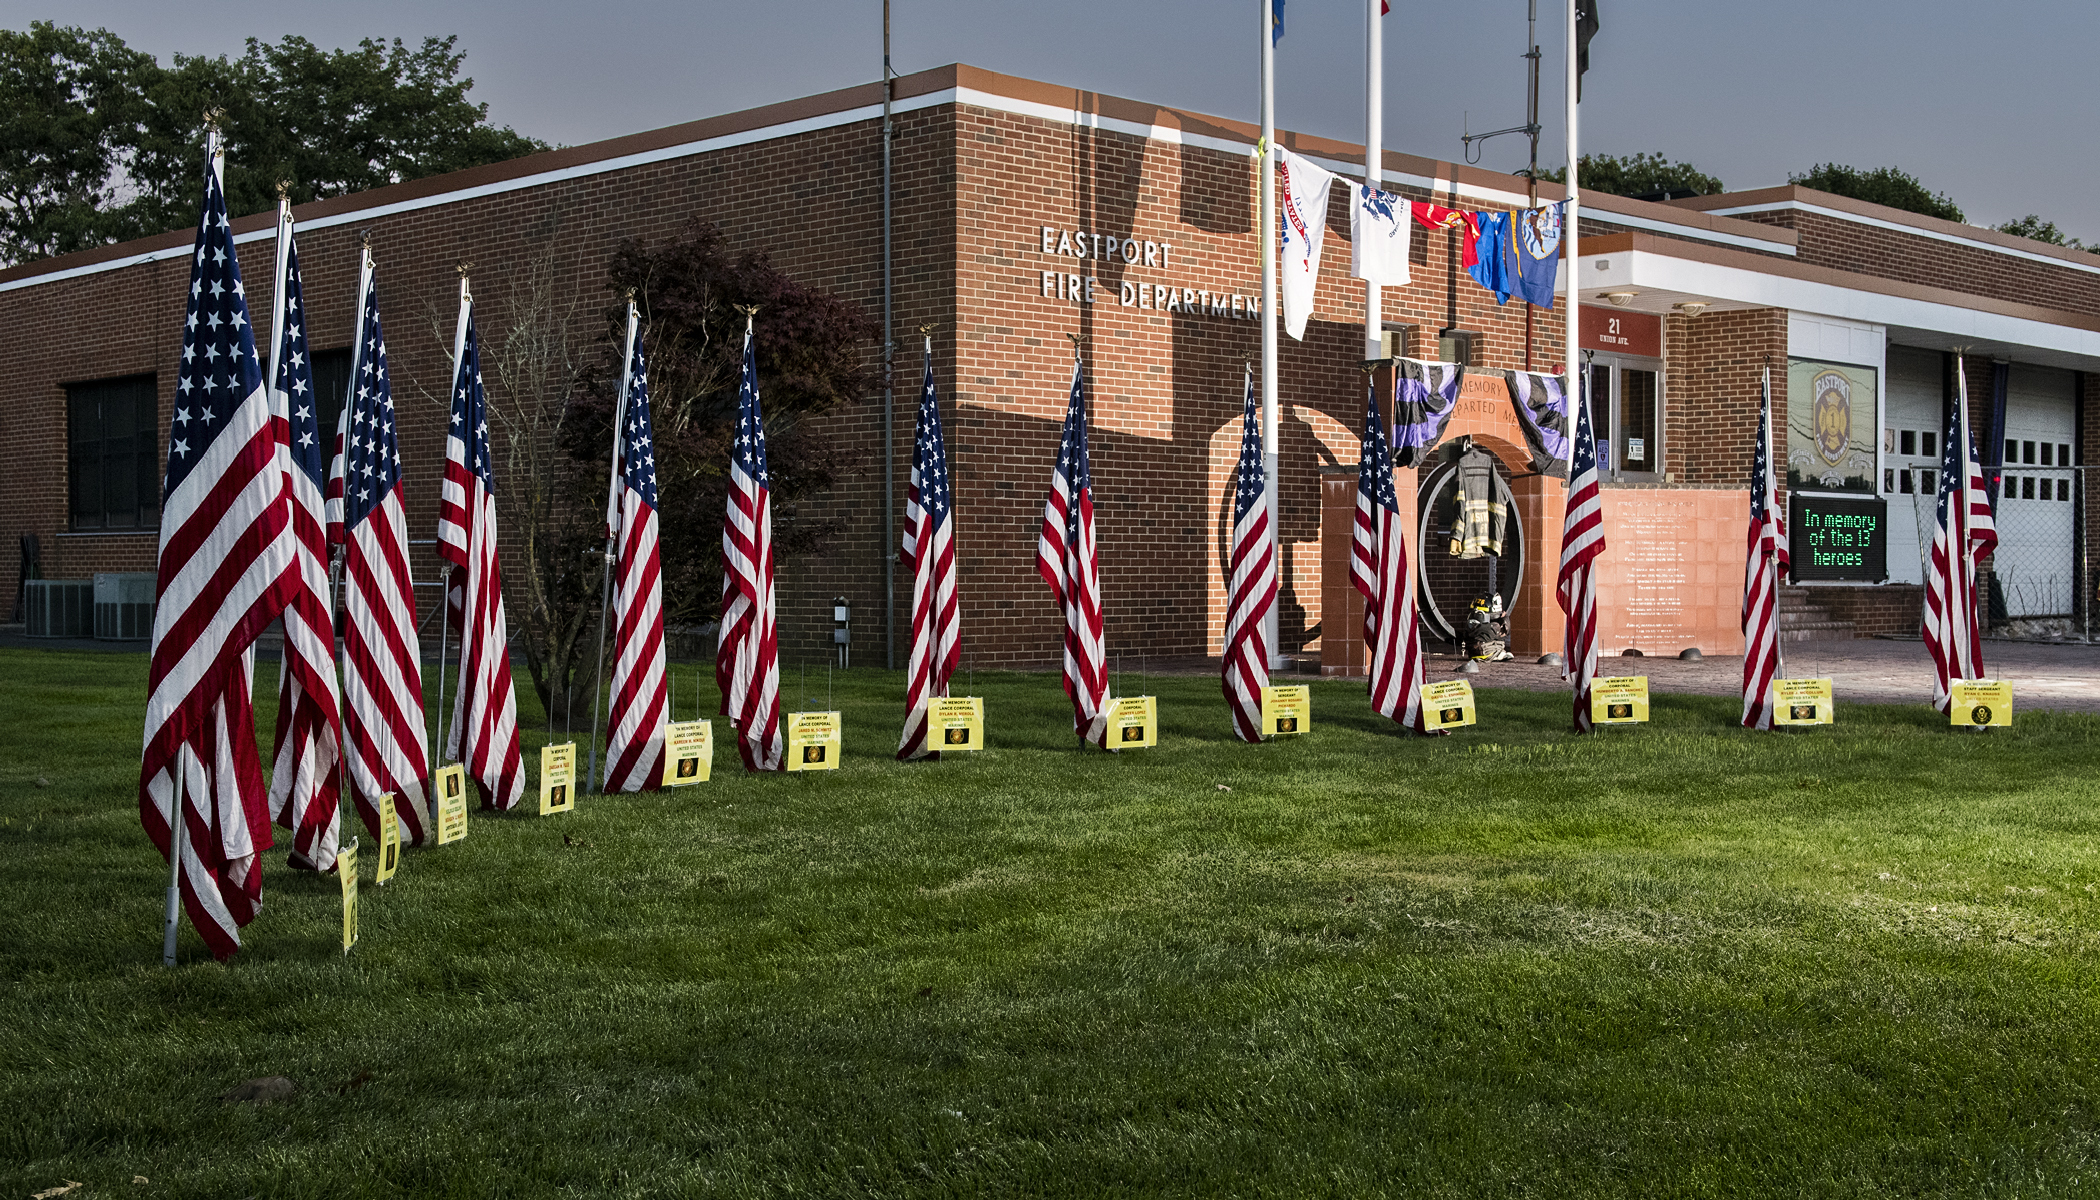 Members of the Eastport Fire Department installed a flag display in front of its firehouse last week. The display honors the one U.S. Navy sailor, one Army soldier, and 11 U.S. Marines killed protecting Americans and Afghan allies in Kabul last week.